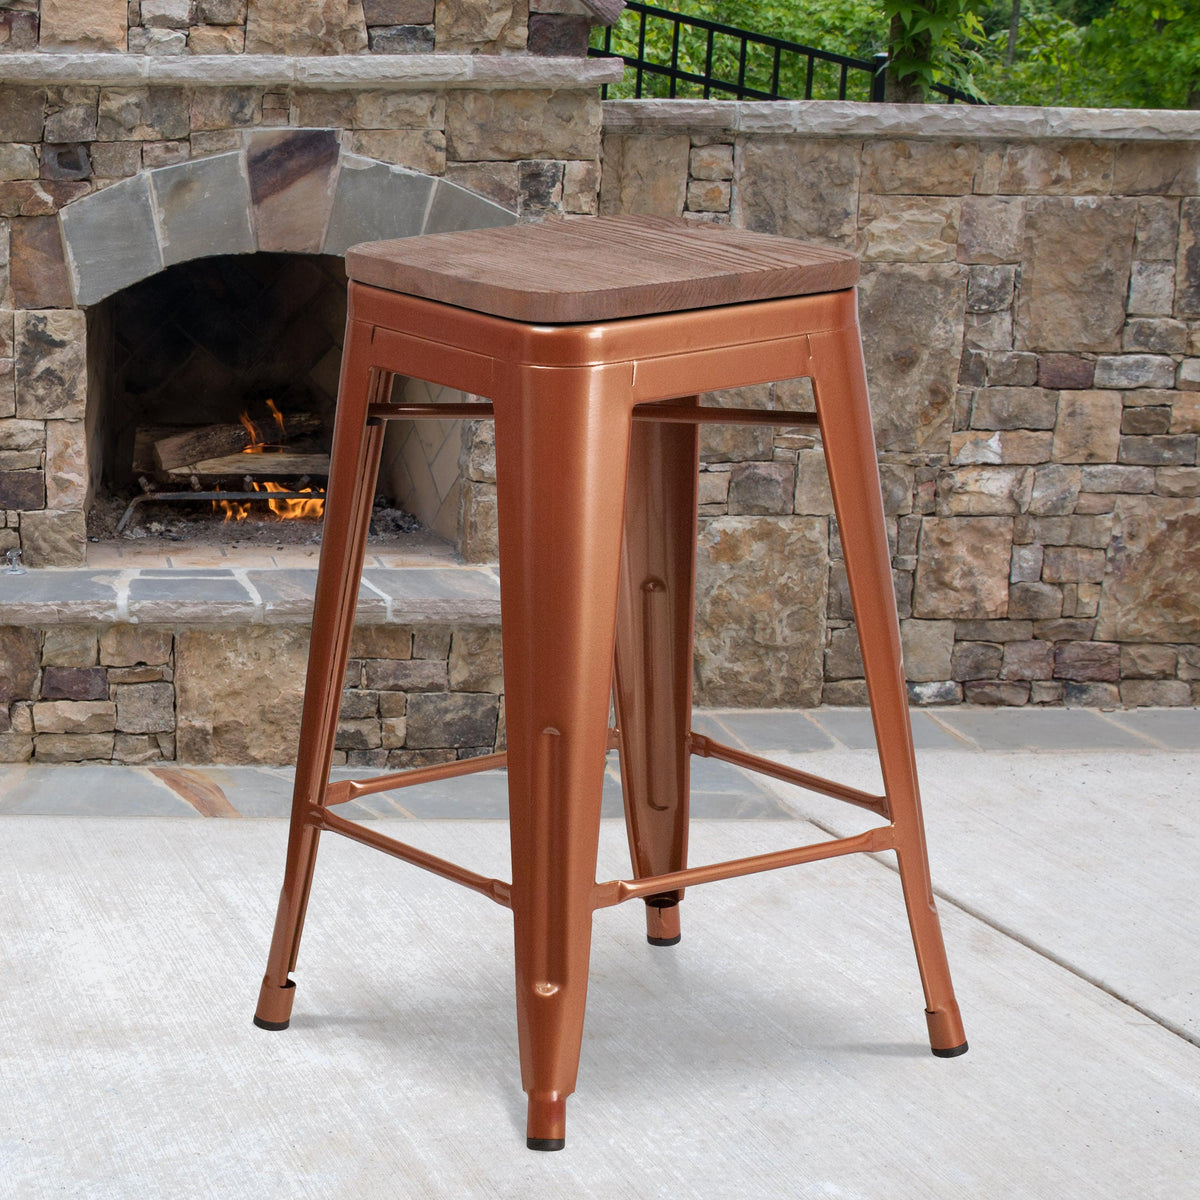 Copper |#| 24inch High Backless Copper Counter Height Stool with Square Wood Seat